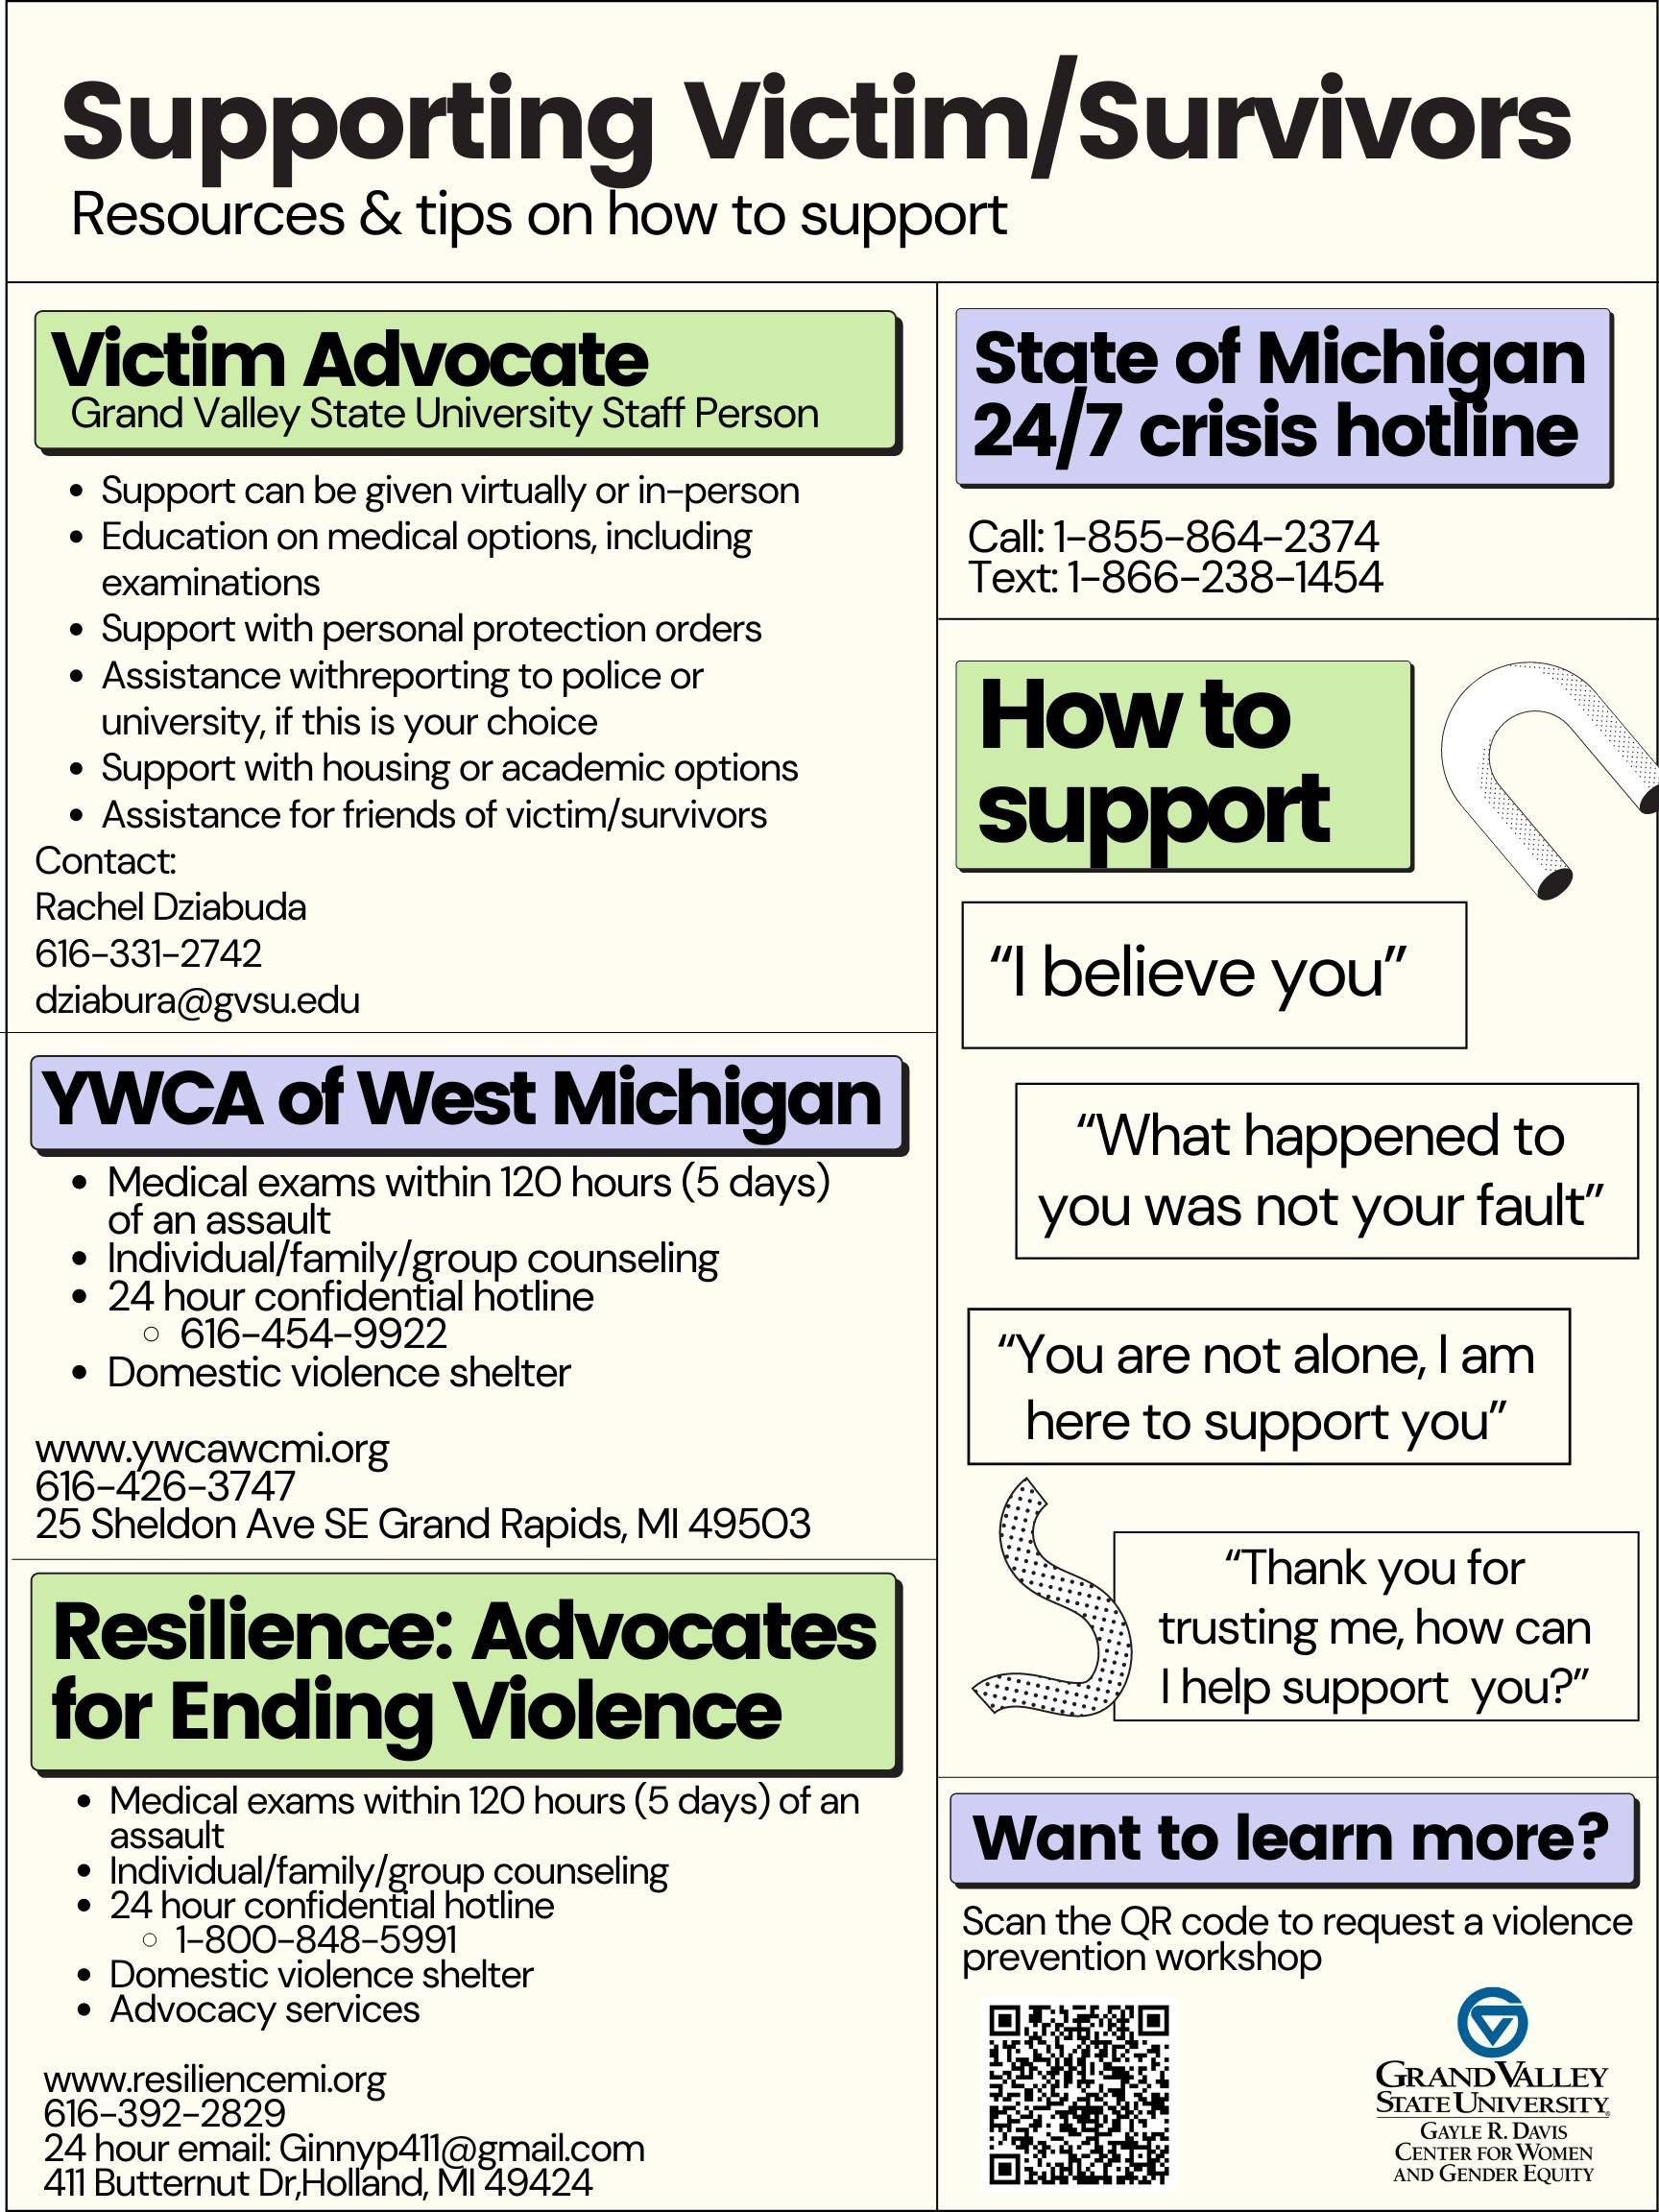 Text with on and off campus resources for supporting survivors of sexual assault